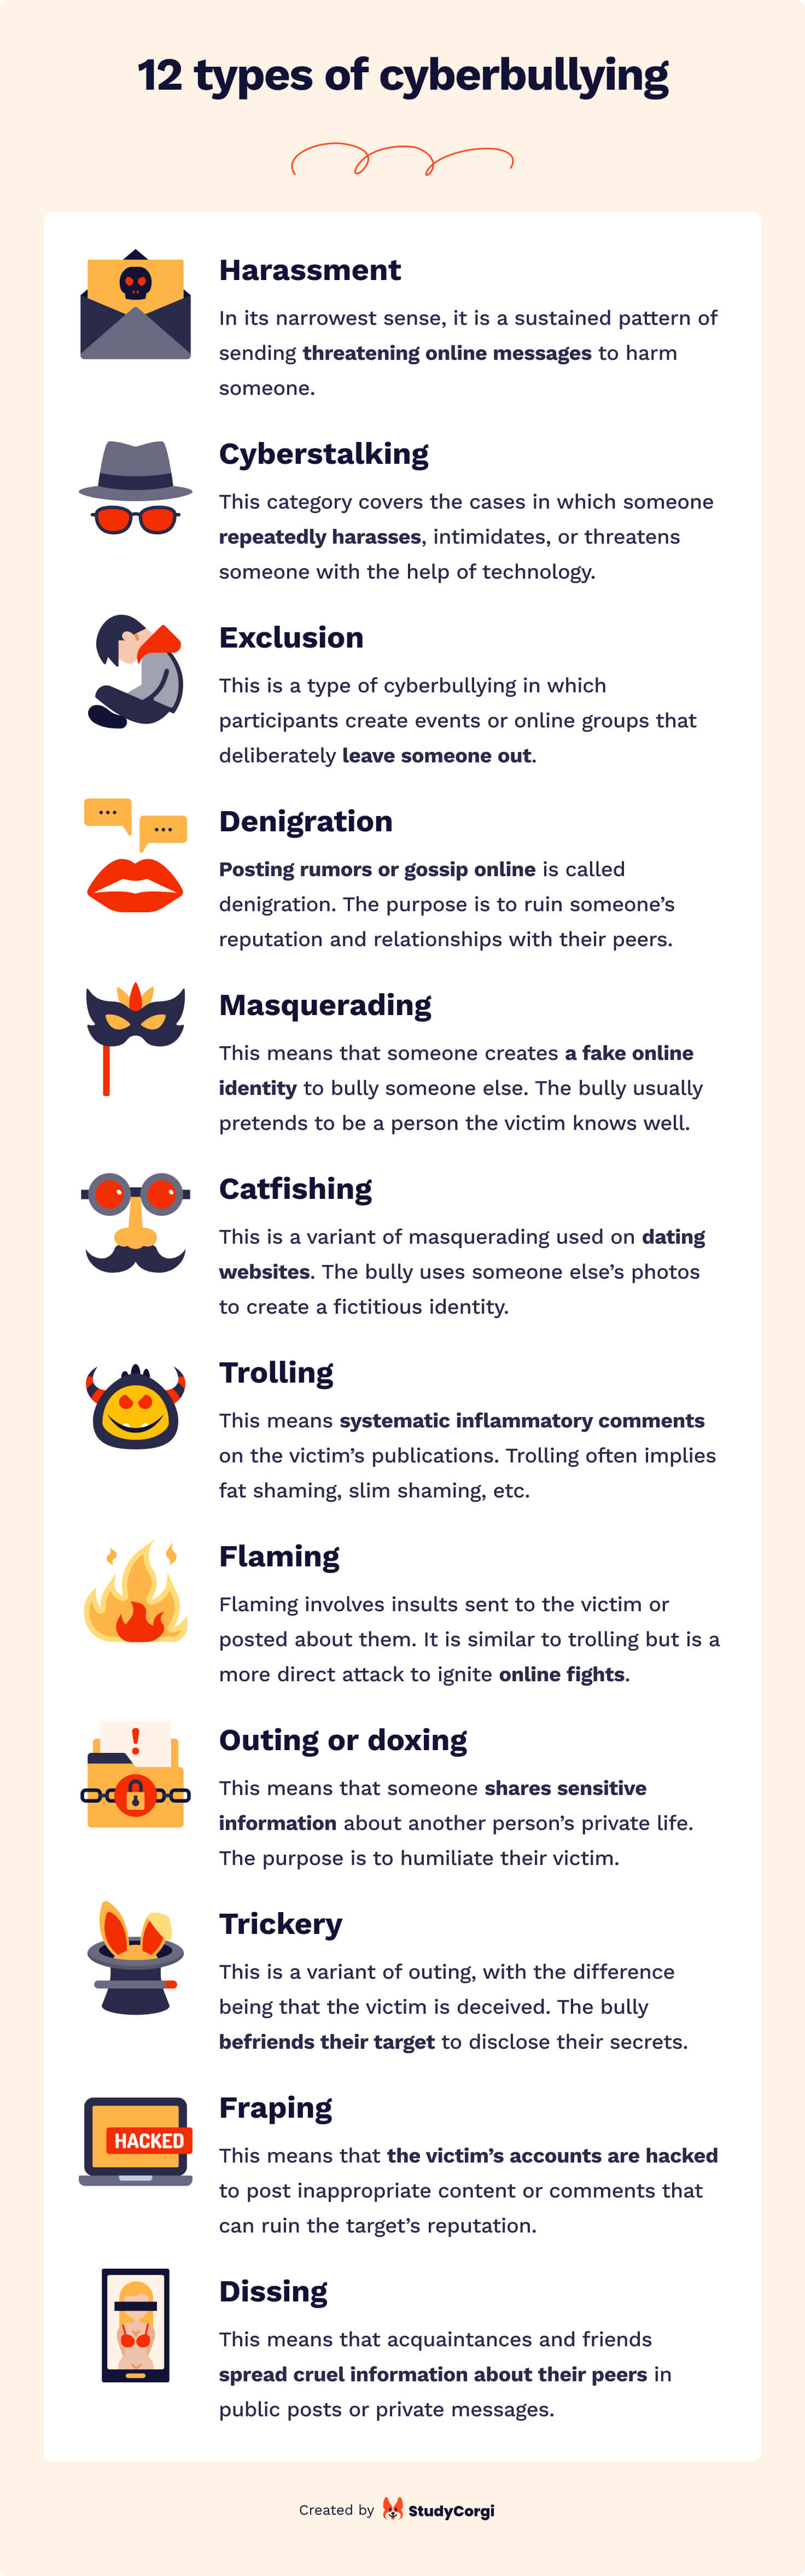 The picture lists 12 types of cyberbullying.